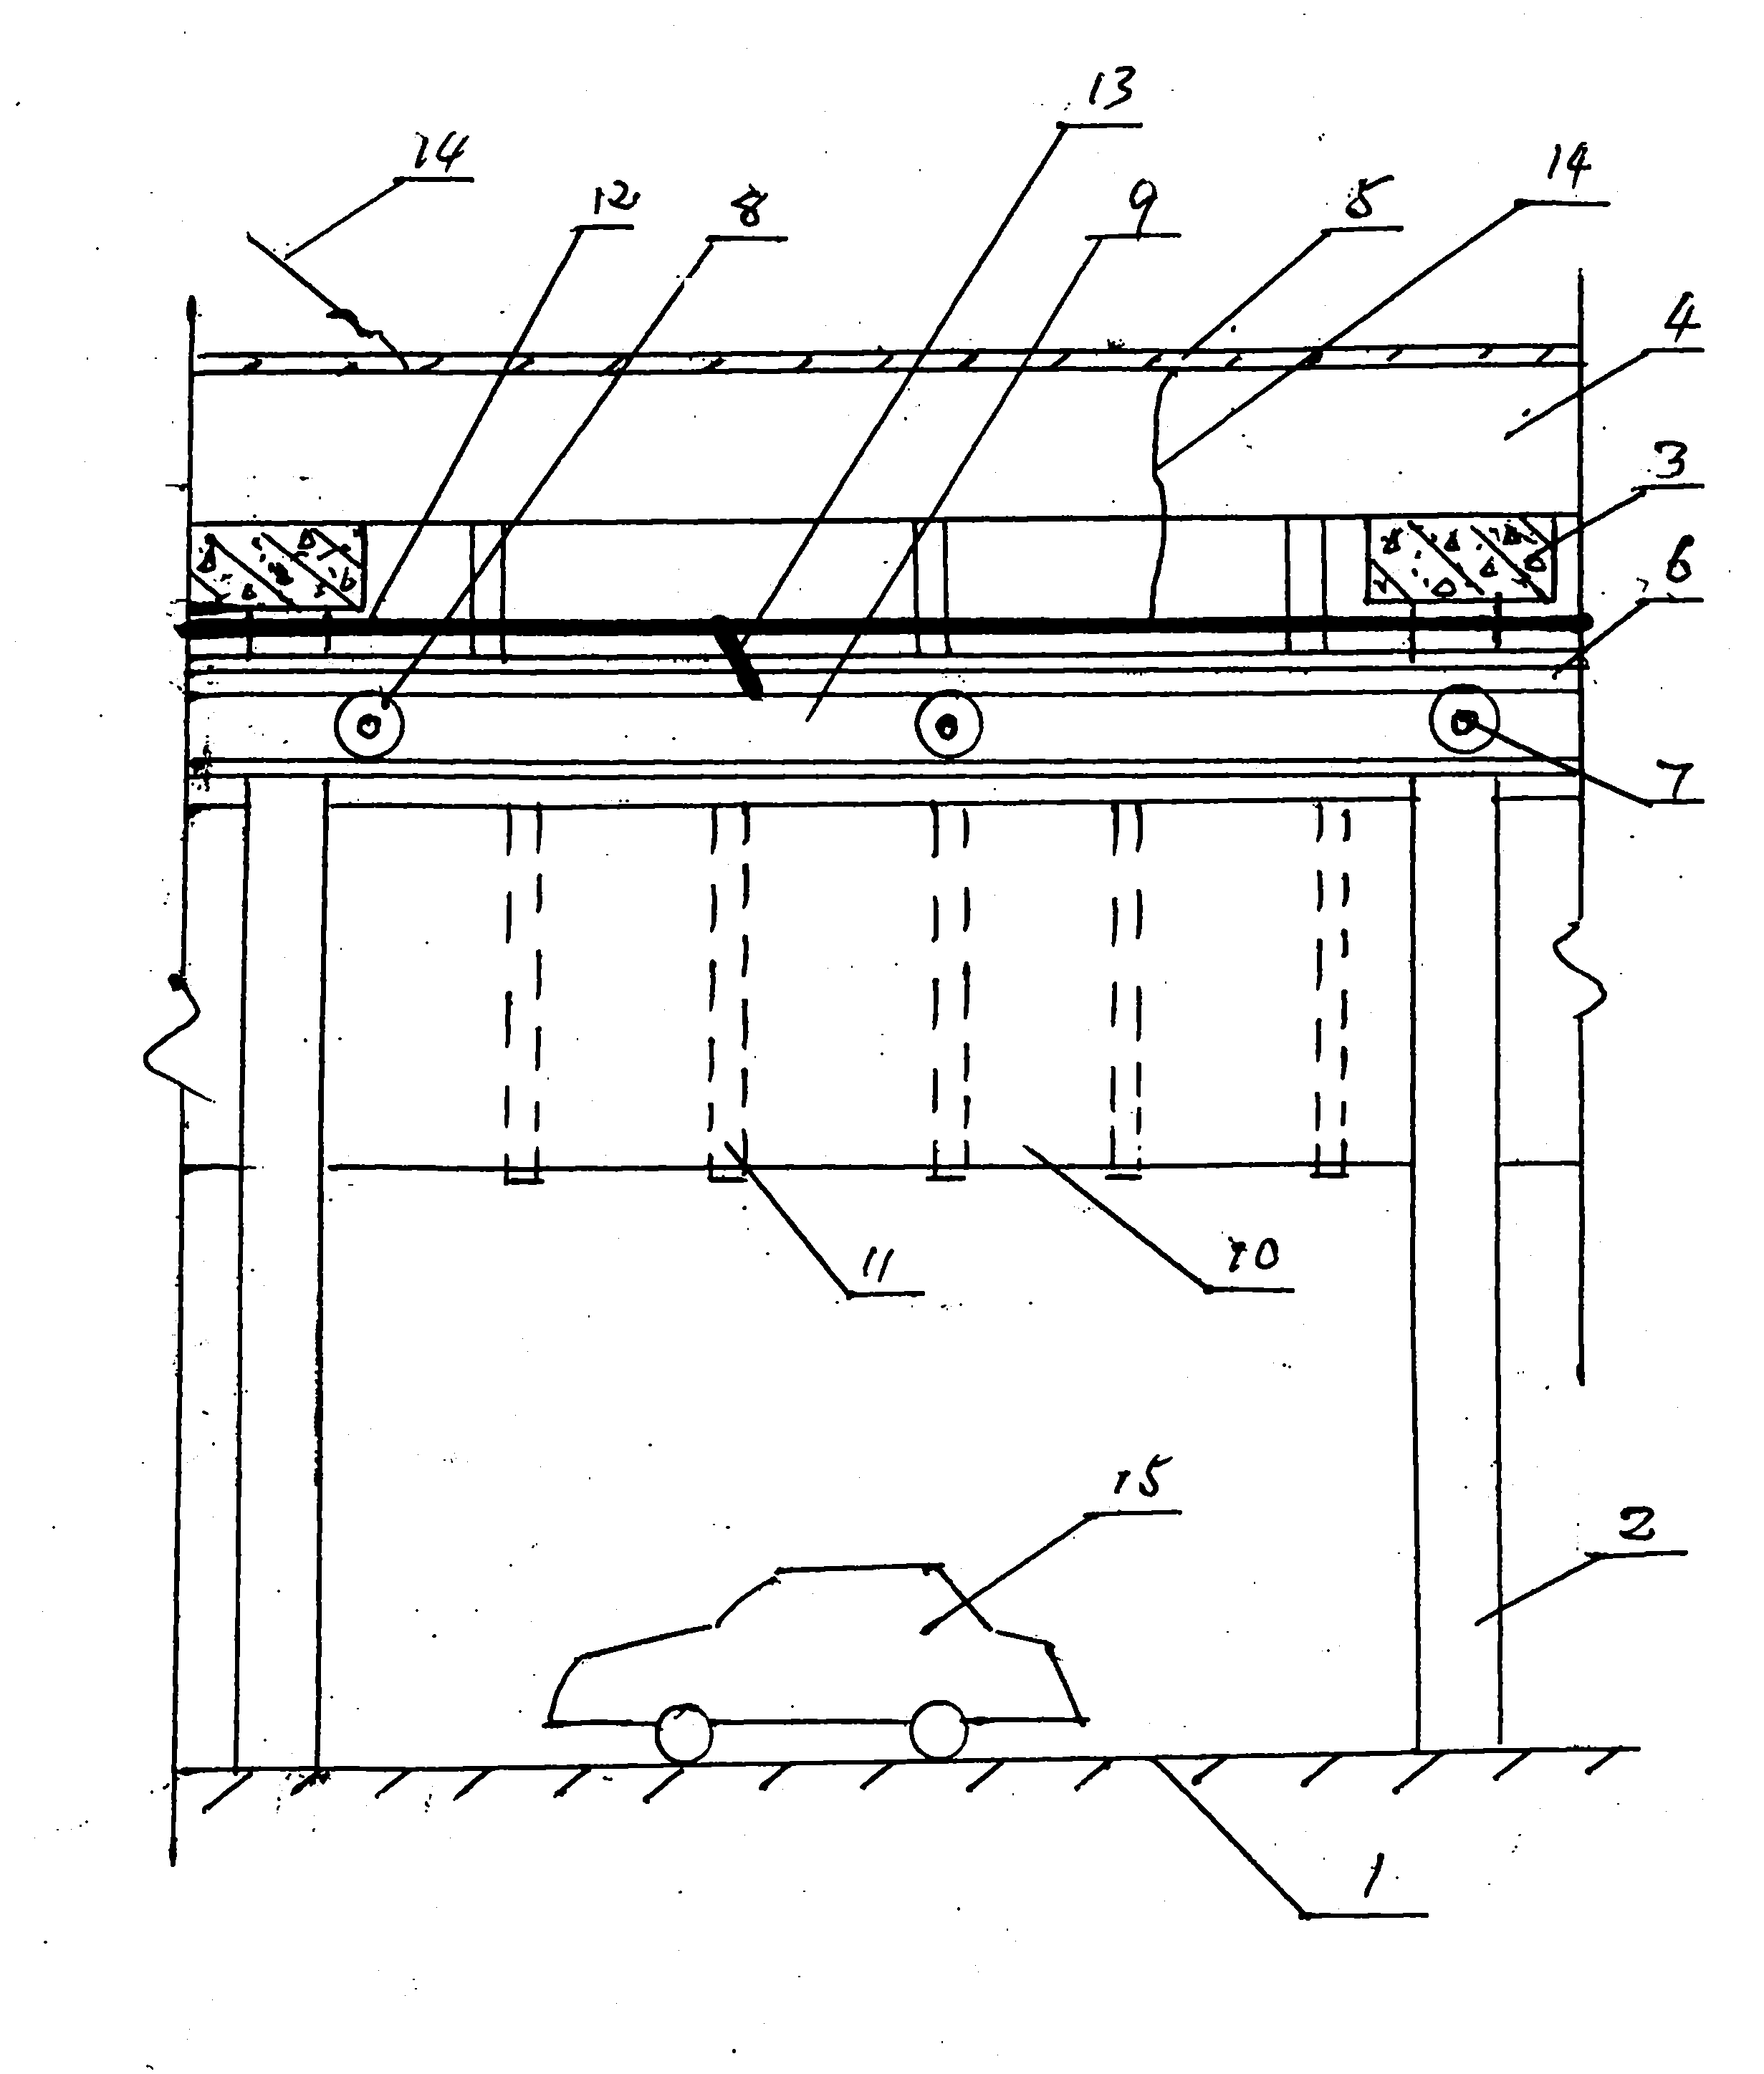 Air train with suspension solar cell panels